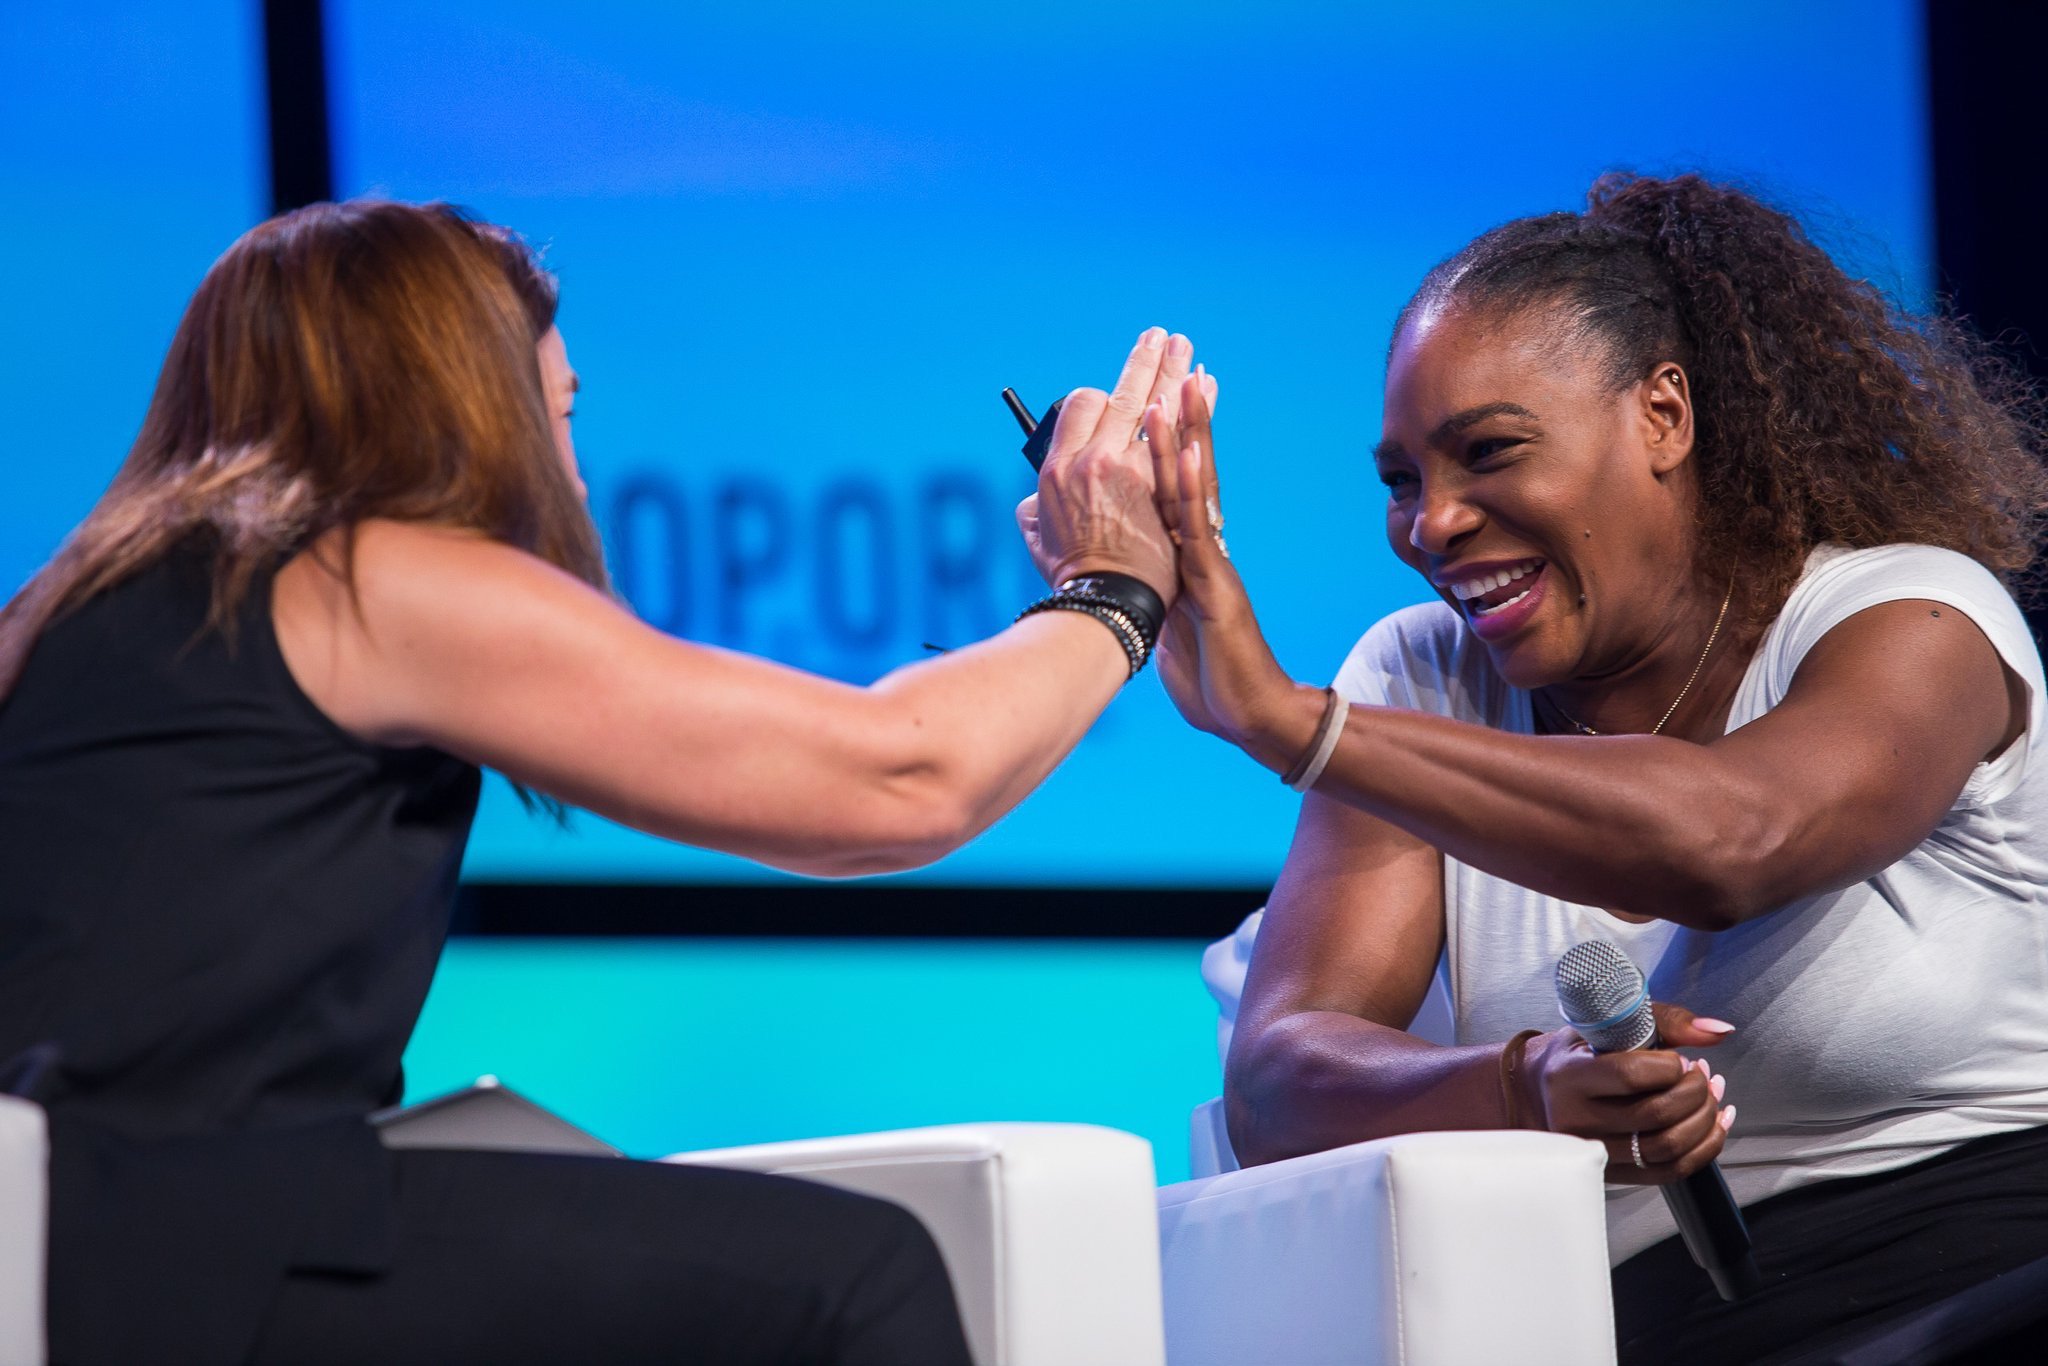 Serena Williams shares her story at the retail conference